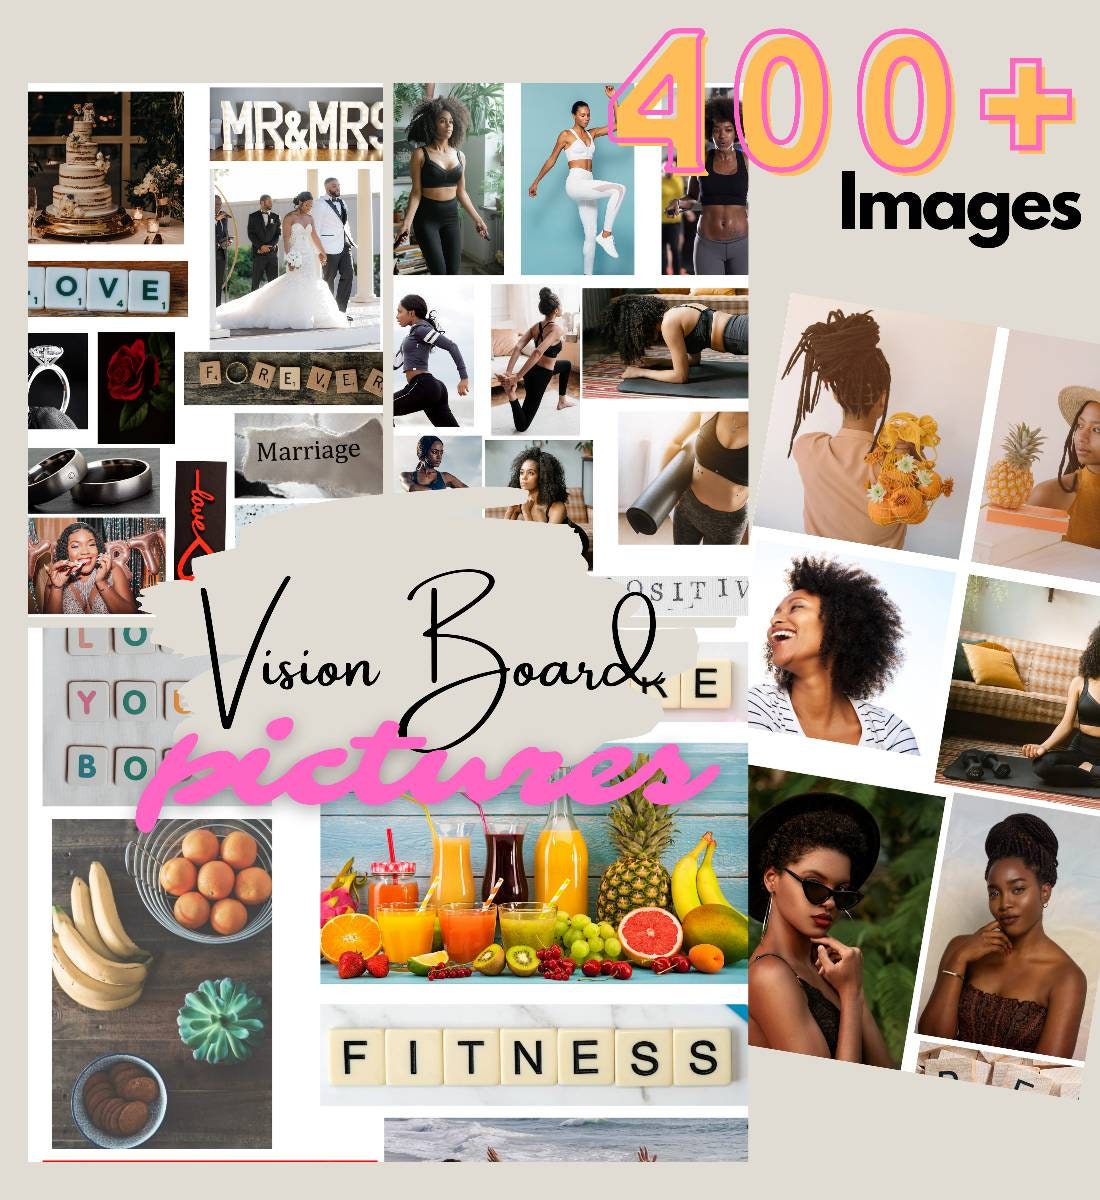 Buy Vision Board Supplies For Black Women: Create An Effective Vision Board  That Support Your Dreams And Goals From Over 250 Supplies Devided Between  Pictures And Word Art + BONUS Online at desertcartINDIA